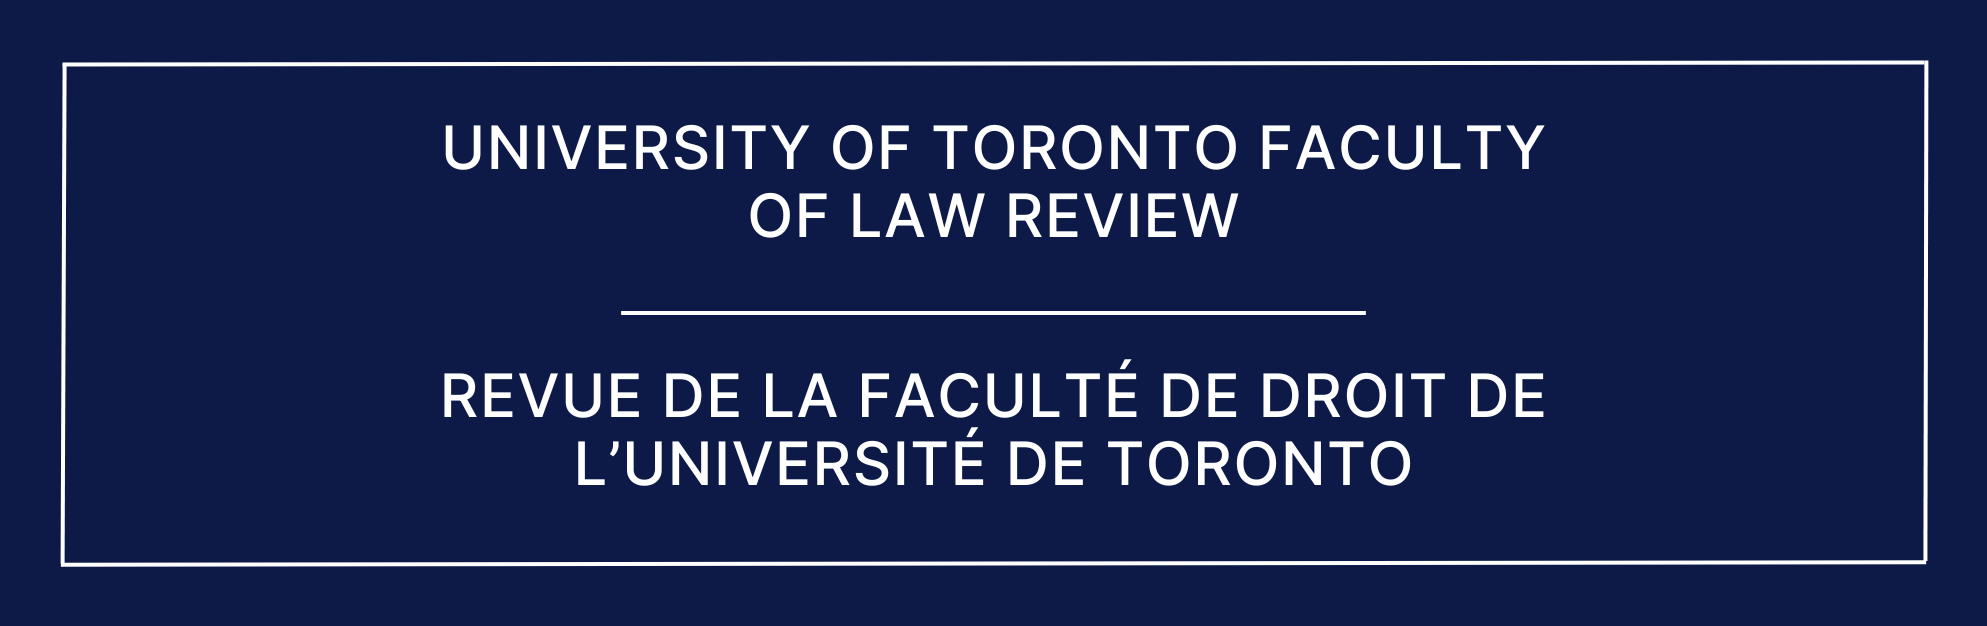 Stealthing as Sexual Assault The Supreme Court of Canadas Decision in R v Kirkpatrick and Implications for Campus Sexual Violence Policies Across Canada — University of Toronto Faculty of Law Review